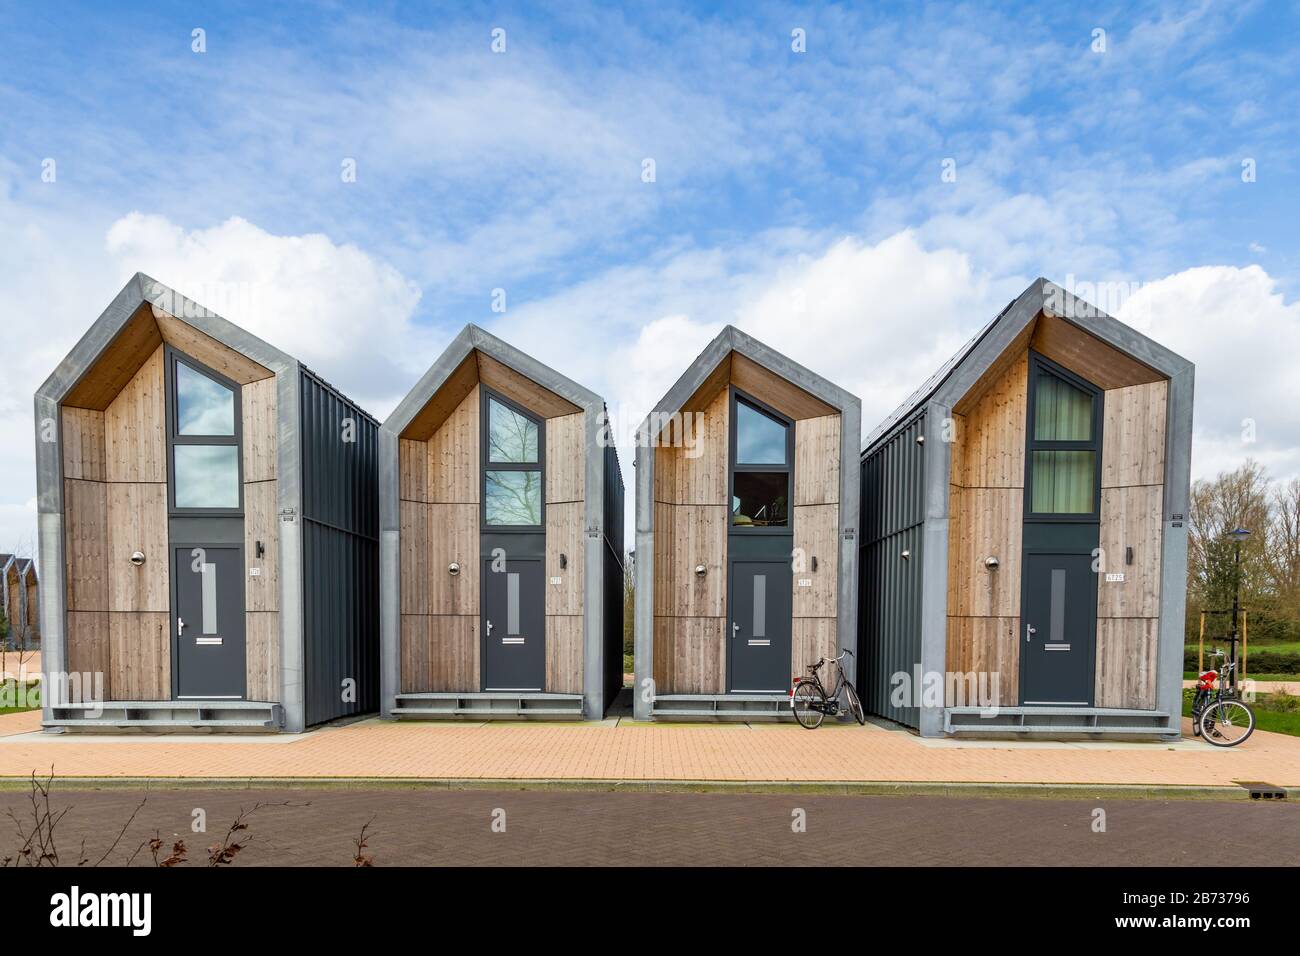 Nijkerk, Netherlands,March 12, 2020: Eco friendly tiny houses in NIjkerk. 39 square meters surface for a sustainable living. Stock Photo